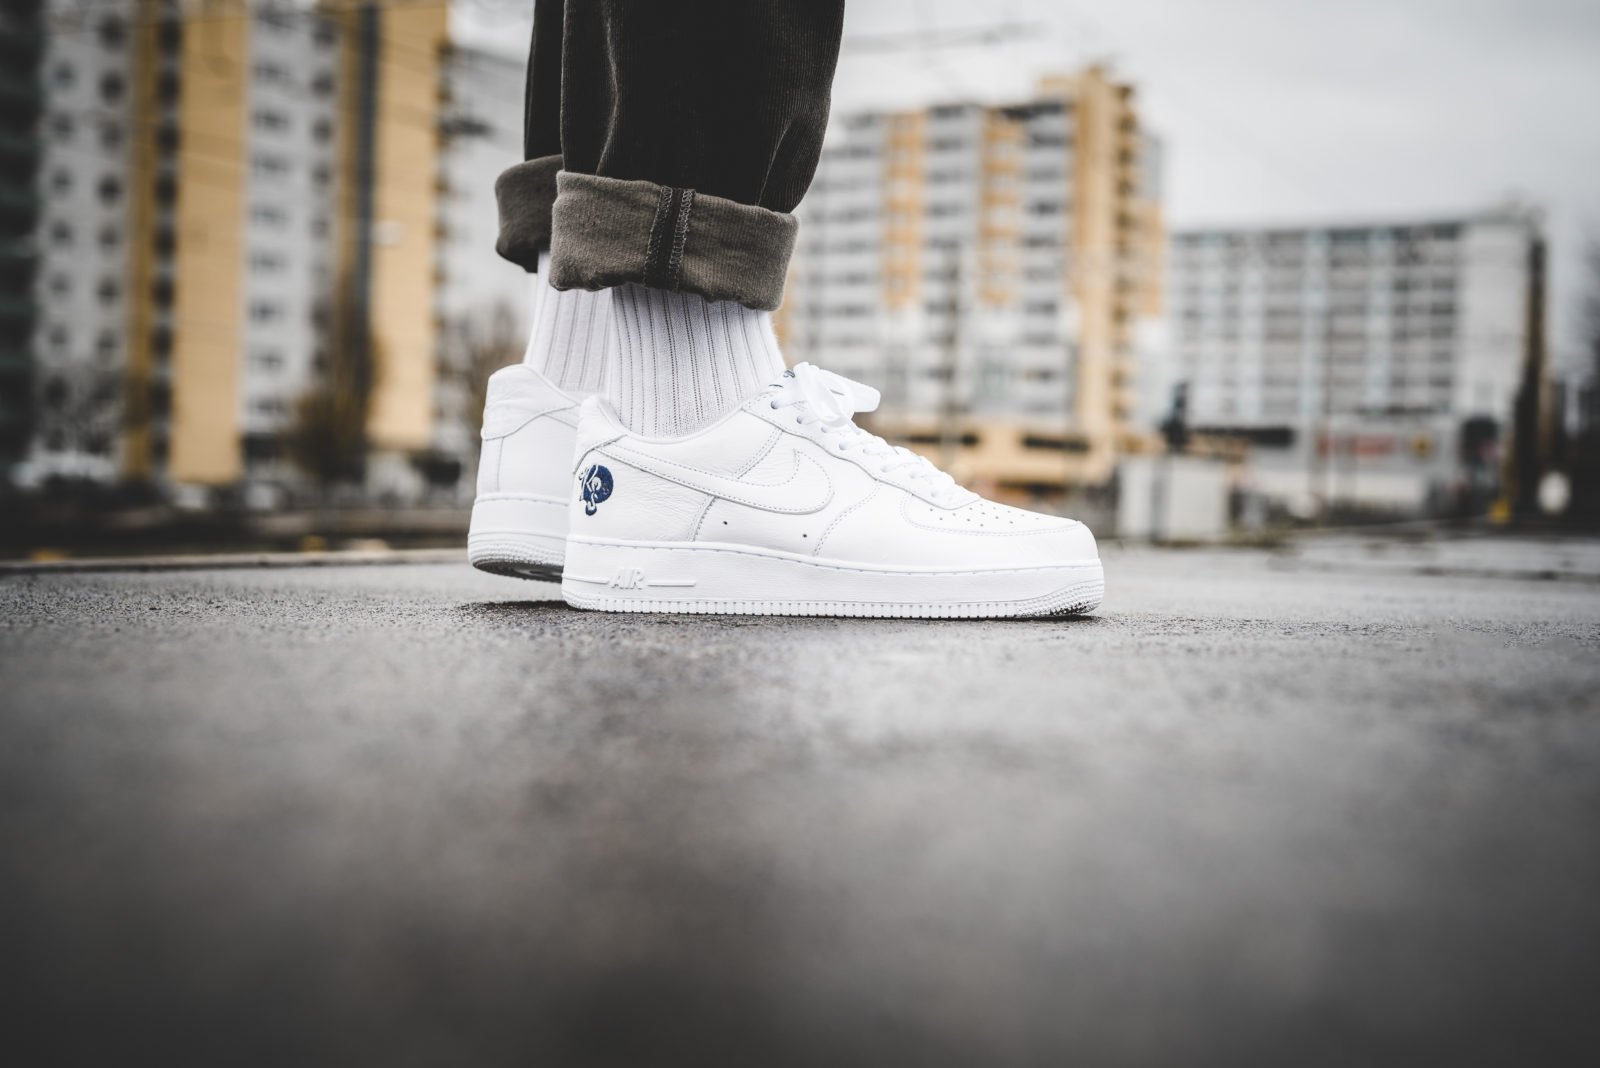 The Sole Supplier on "Nike Air Force 1 07 Roc-a-fella LIVE at Sports! Mens &gt; https://t.co/CmLZfD4ipI Womens &gt; https://t.co/k9ZwqqvW38 https://t.co/hslmm0j8gr" / Twitter